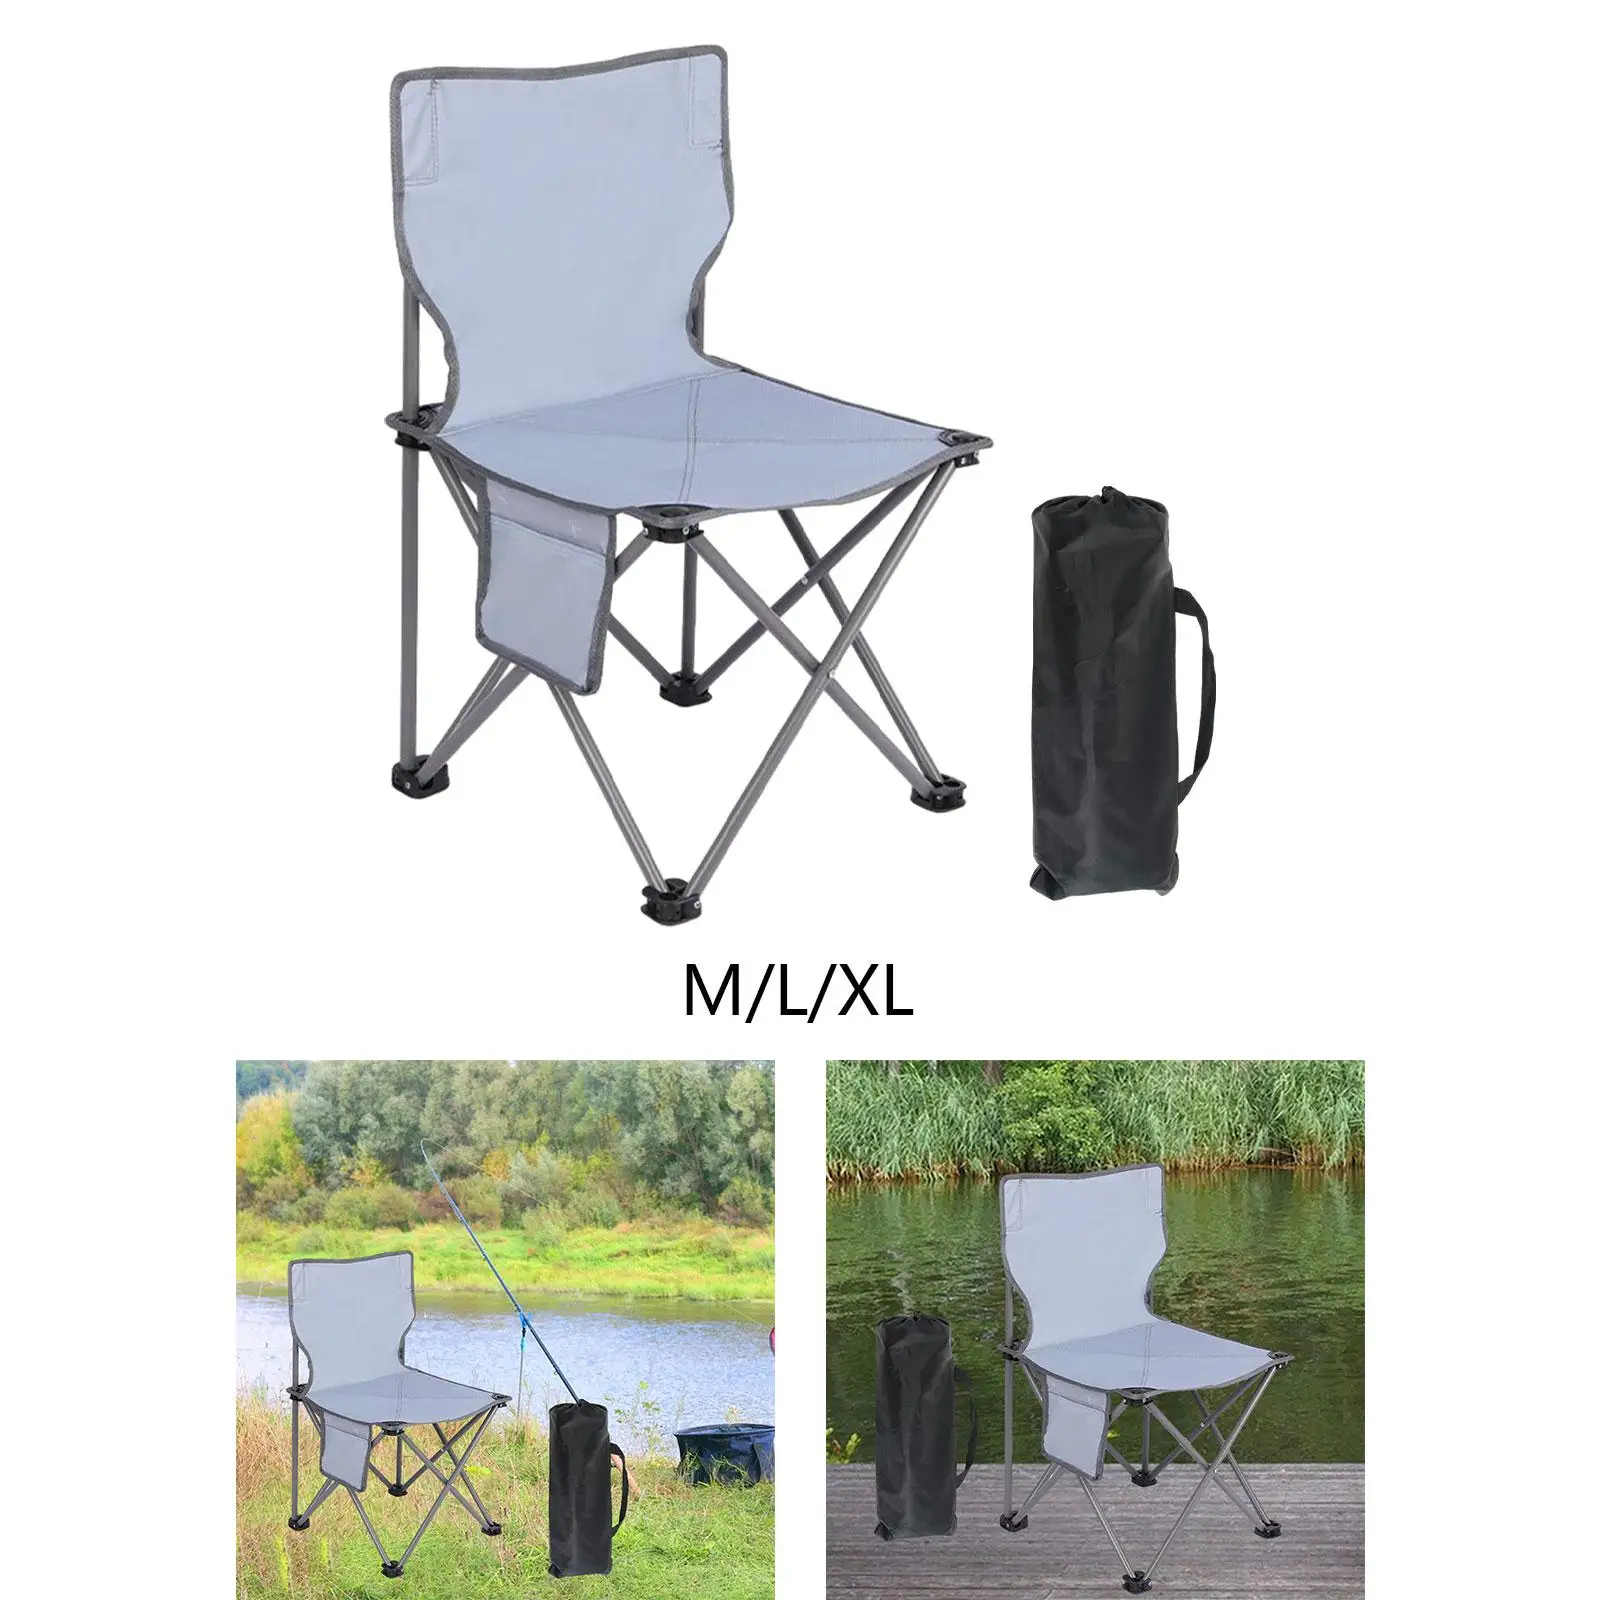 Portable Camping Chair Heavy Duty Oxford Fabric Nonslip with Storage Bag Fishing Chair for Park Picnic Garden Backpacking Beach